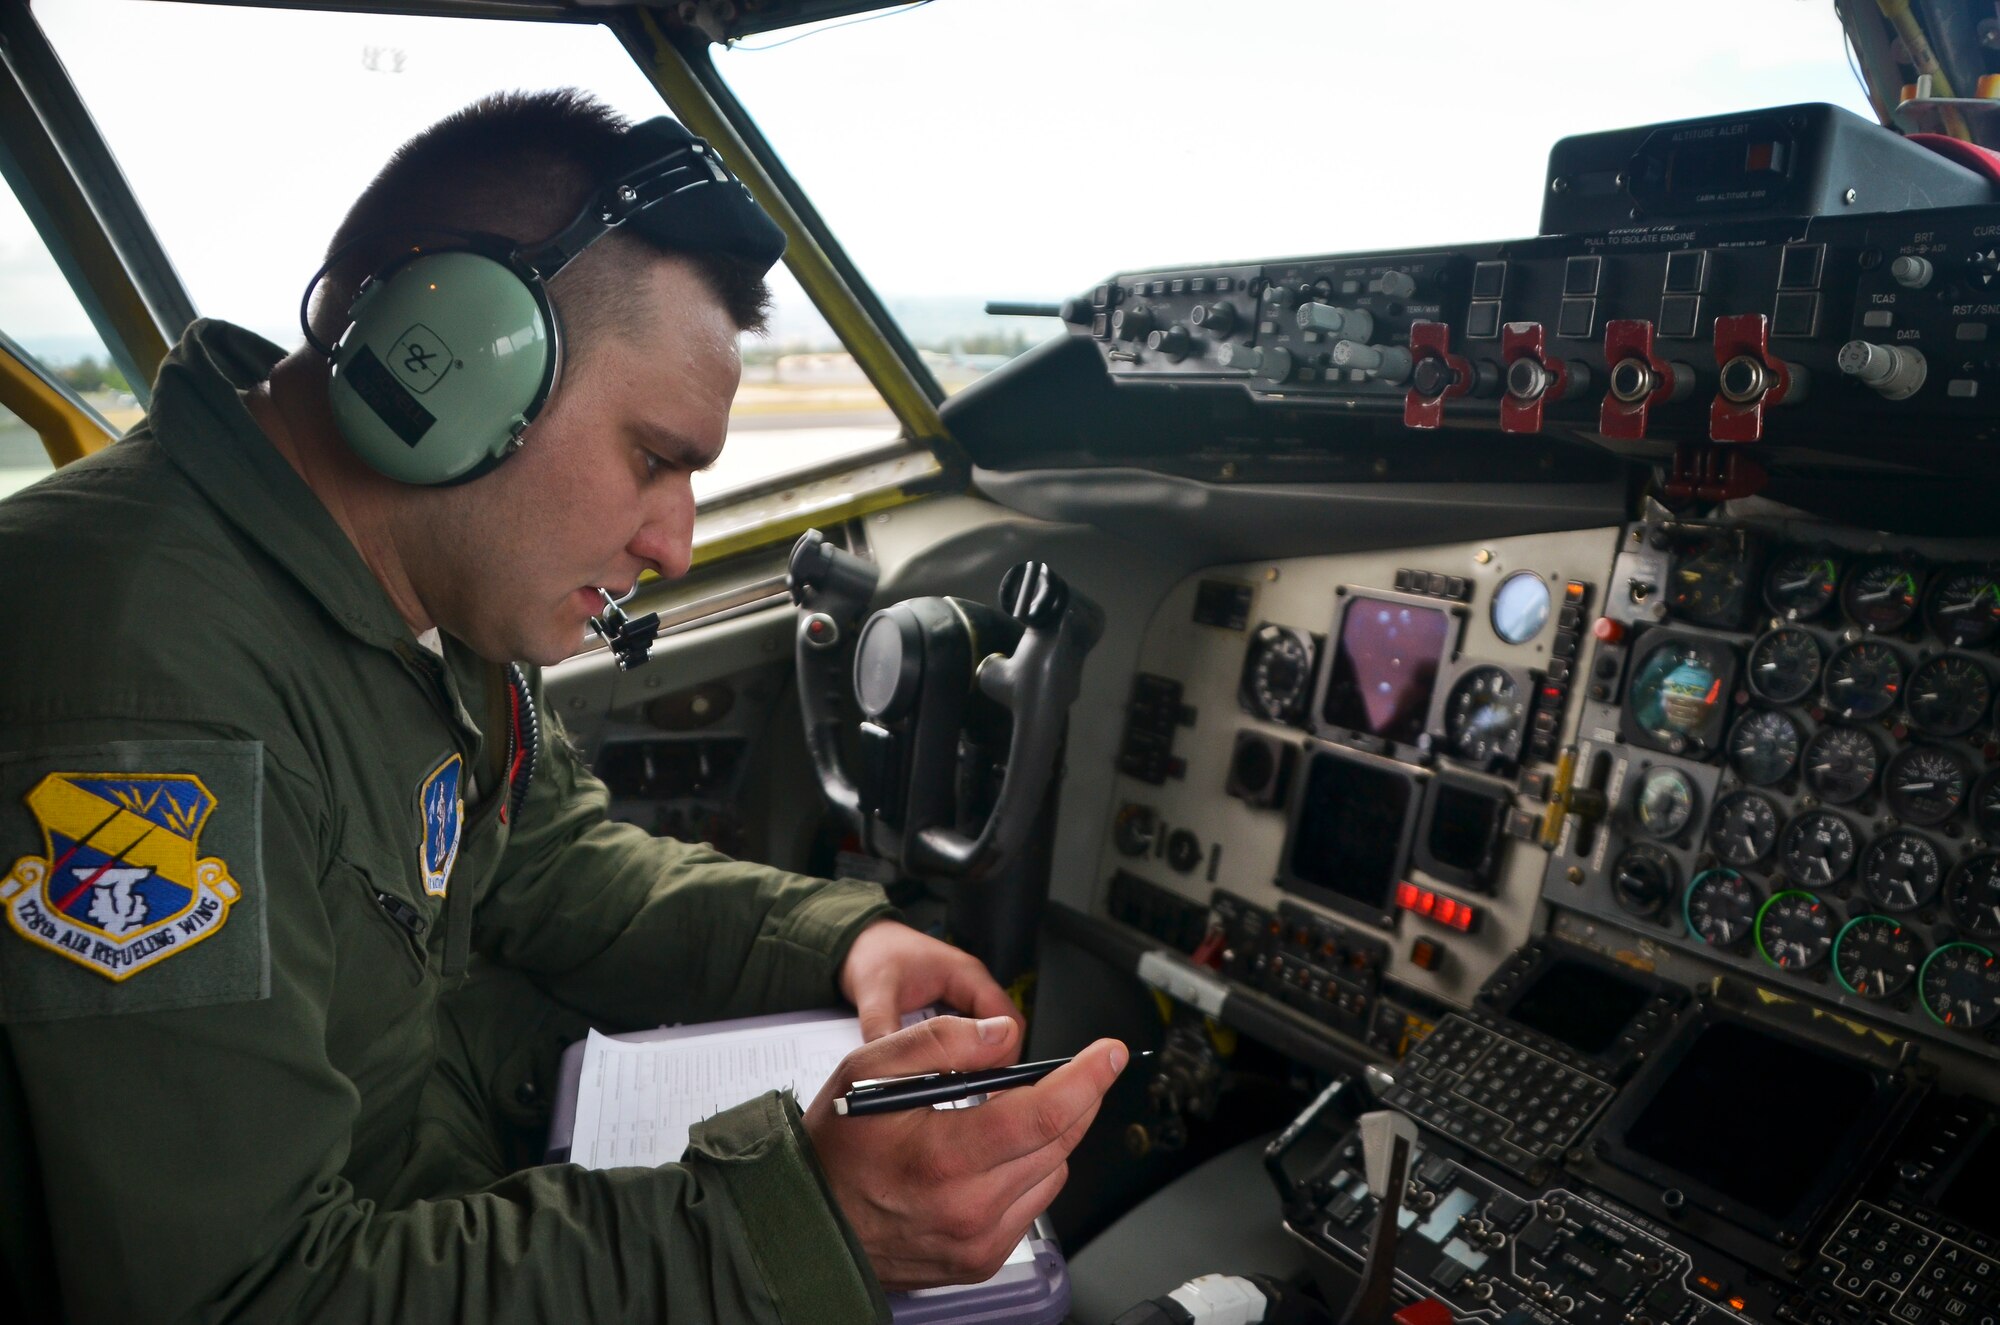 Staff Sgt. Tim Schell, a crew chief with the 128th Air Refueling Wing, Wisconsin Air National Guard, monitors the even distribution of fuel on a KC-135R Stratotanker during fueling operations at Joint Base Pearl Harbor Hickam, Hawaii.  This was one of the five stops that the 128 ARW aircrew flew to during a 6-day mission ready airlift to transport Maryland Air National Guard members from their training in Guam to their home base near Baltimore April 20-25, 2016.   (U.S. Air National Guard photo by Tech. Sgt. Jenna V. Lenski/Released)
